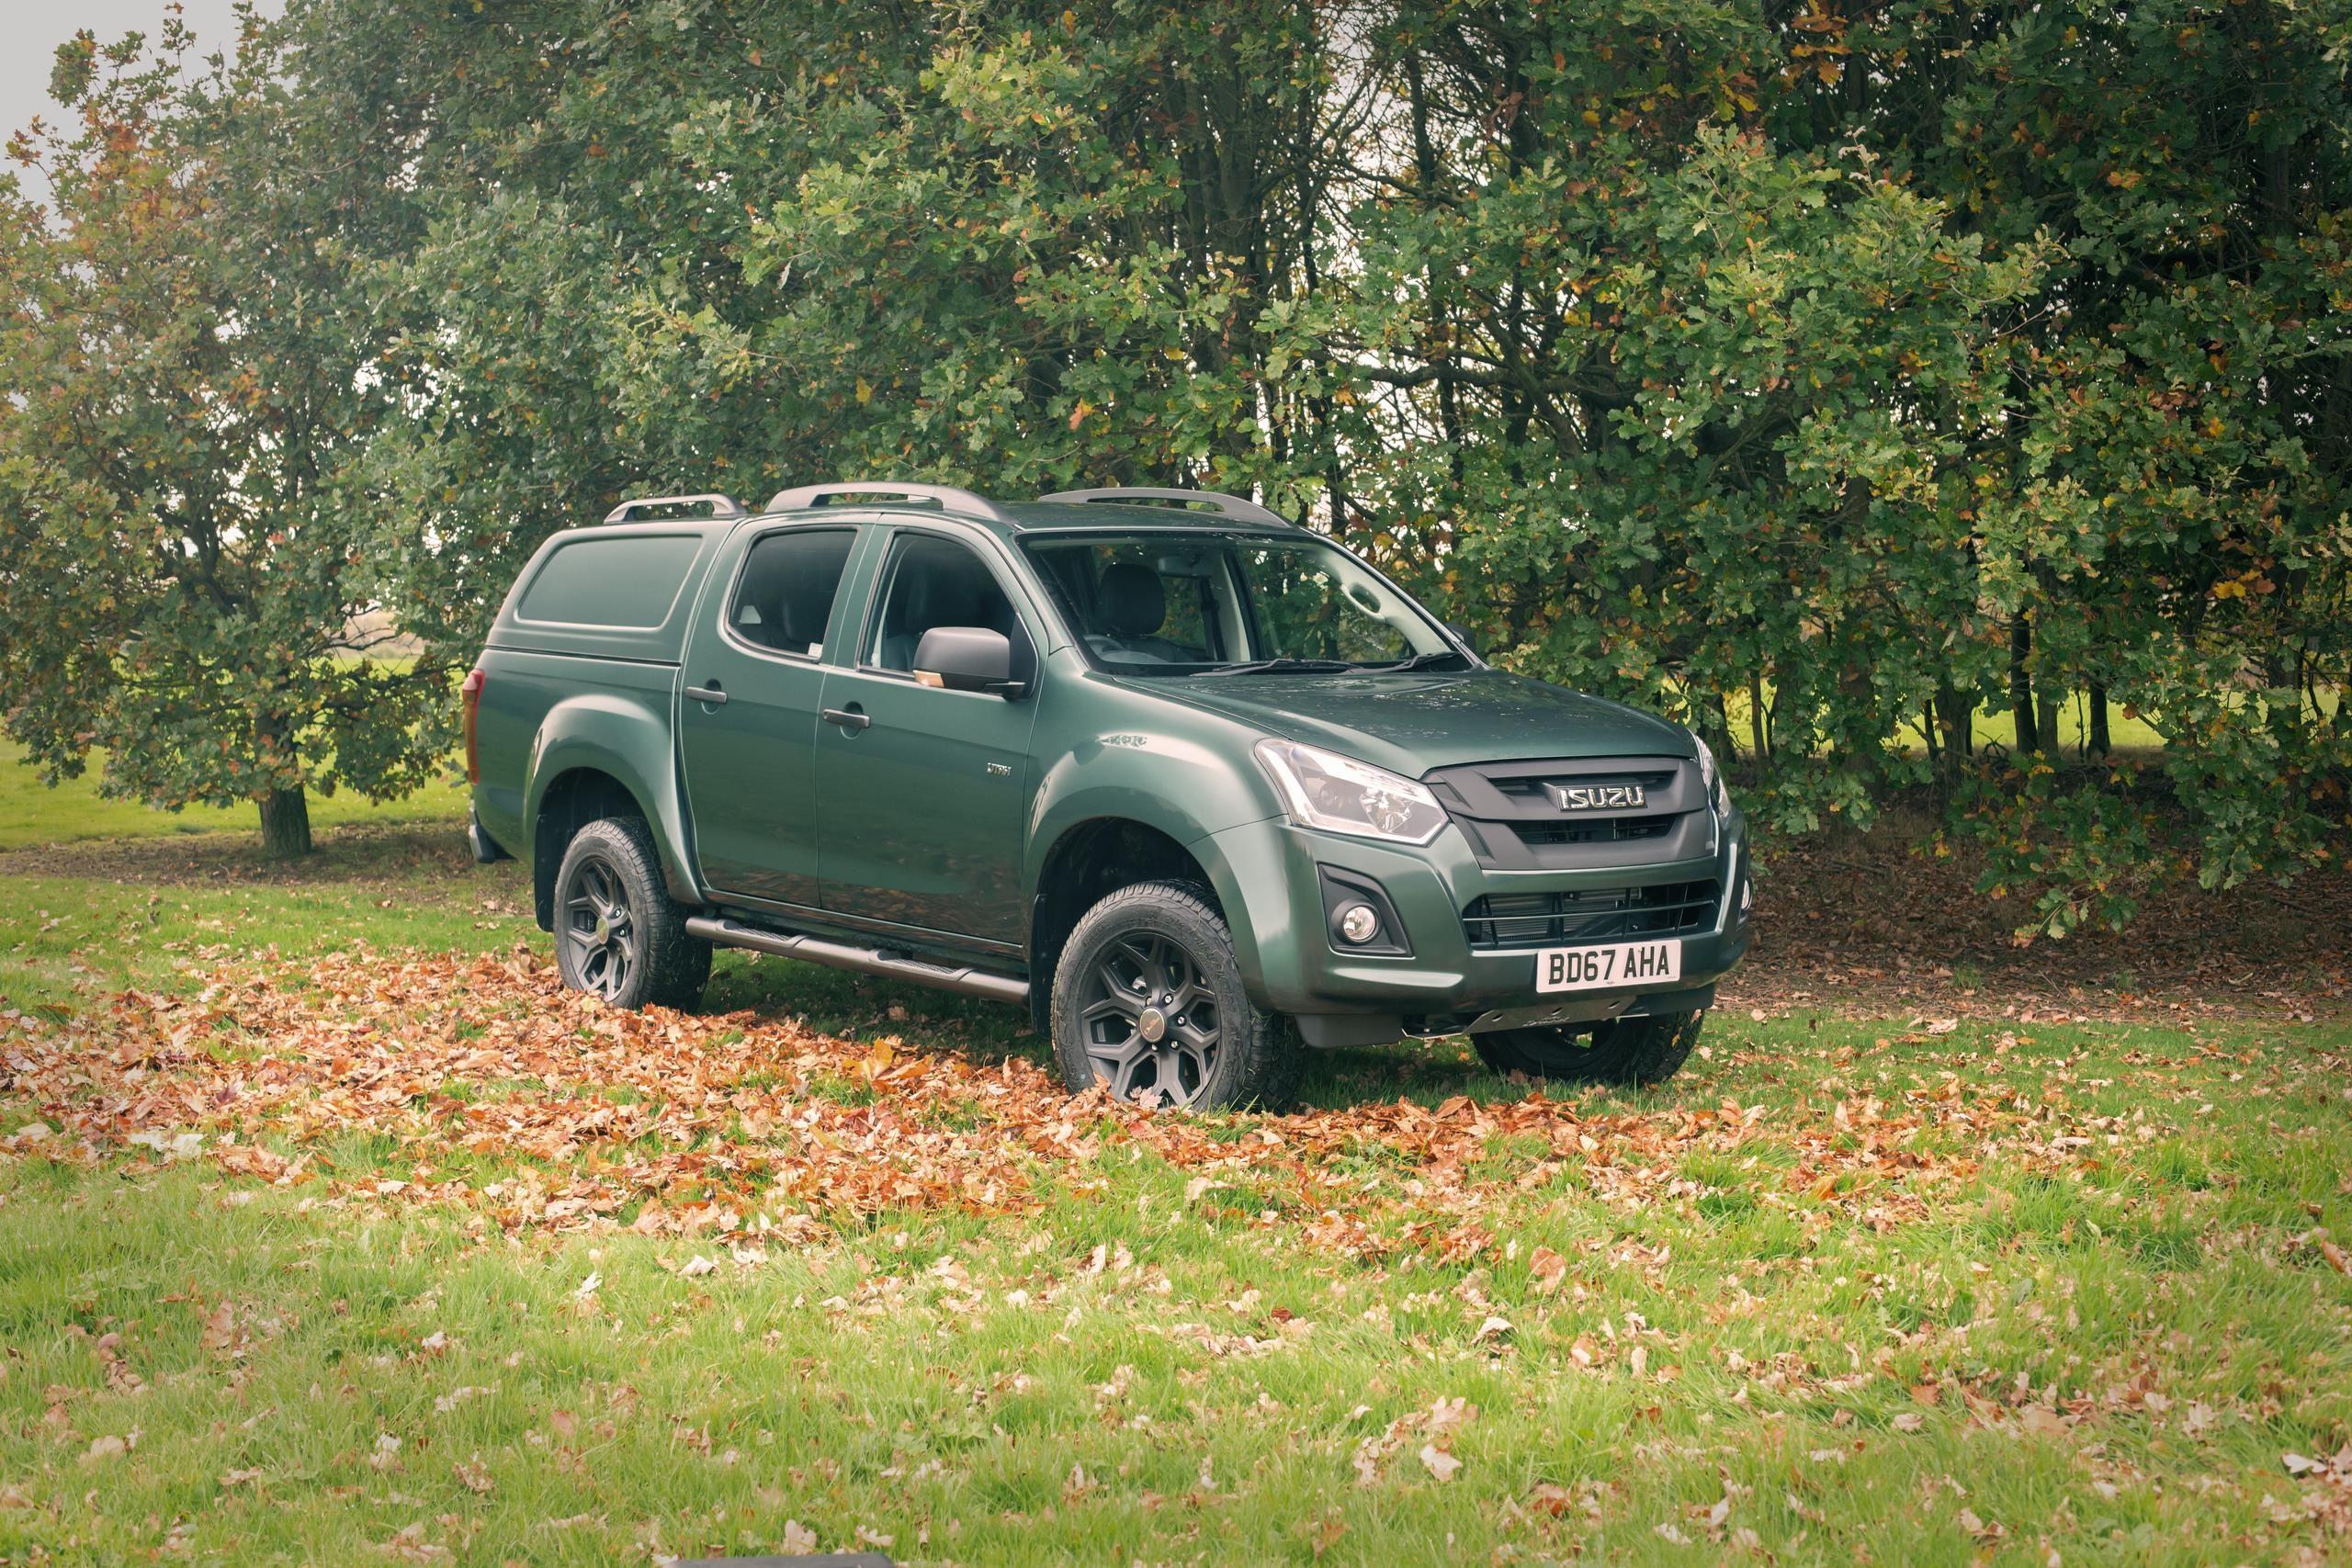 ISUZU ARRIVES AT THE GREAT BRITISH SHOOTING SHOW 2018